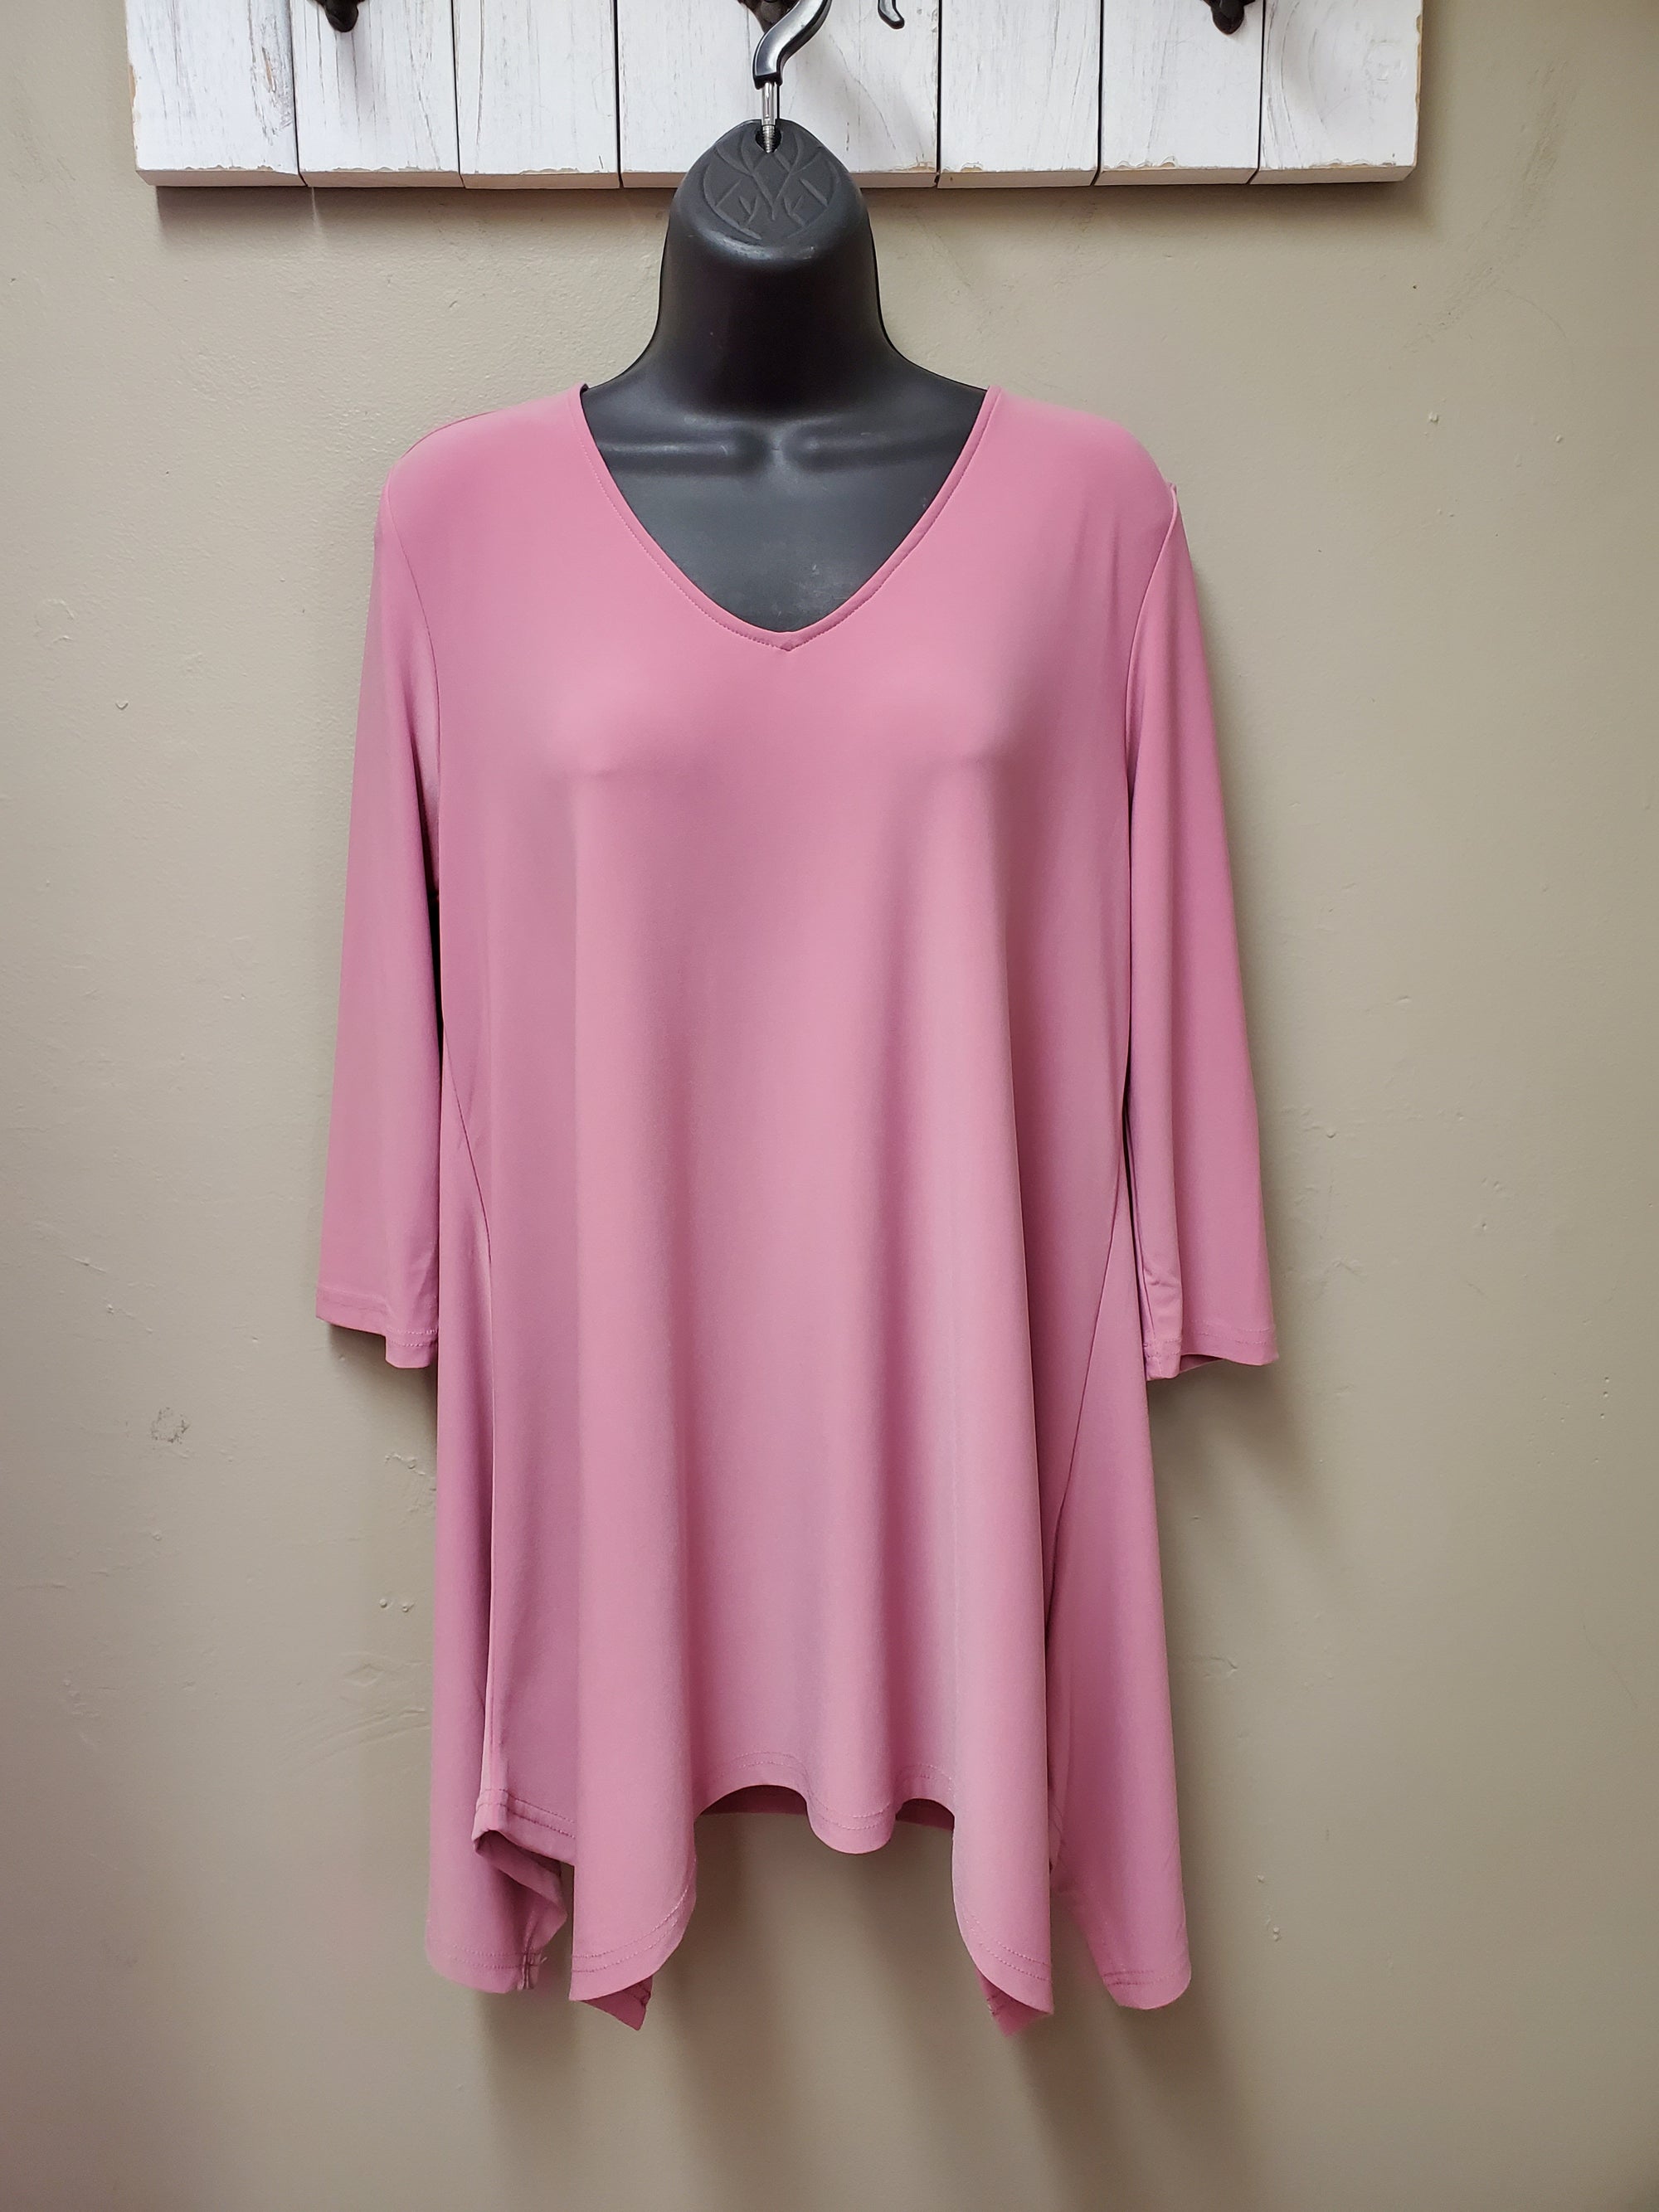 BEST SELLING COLORS - Flattering Fit & Flair Tunic with 3/4 Sleeve - You-nique Bou-tique